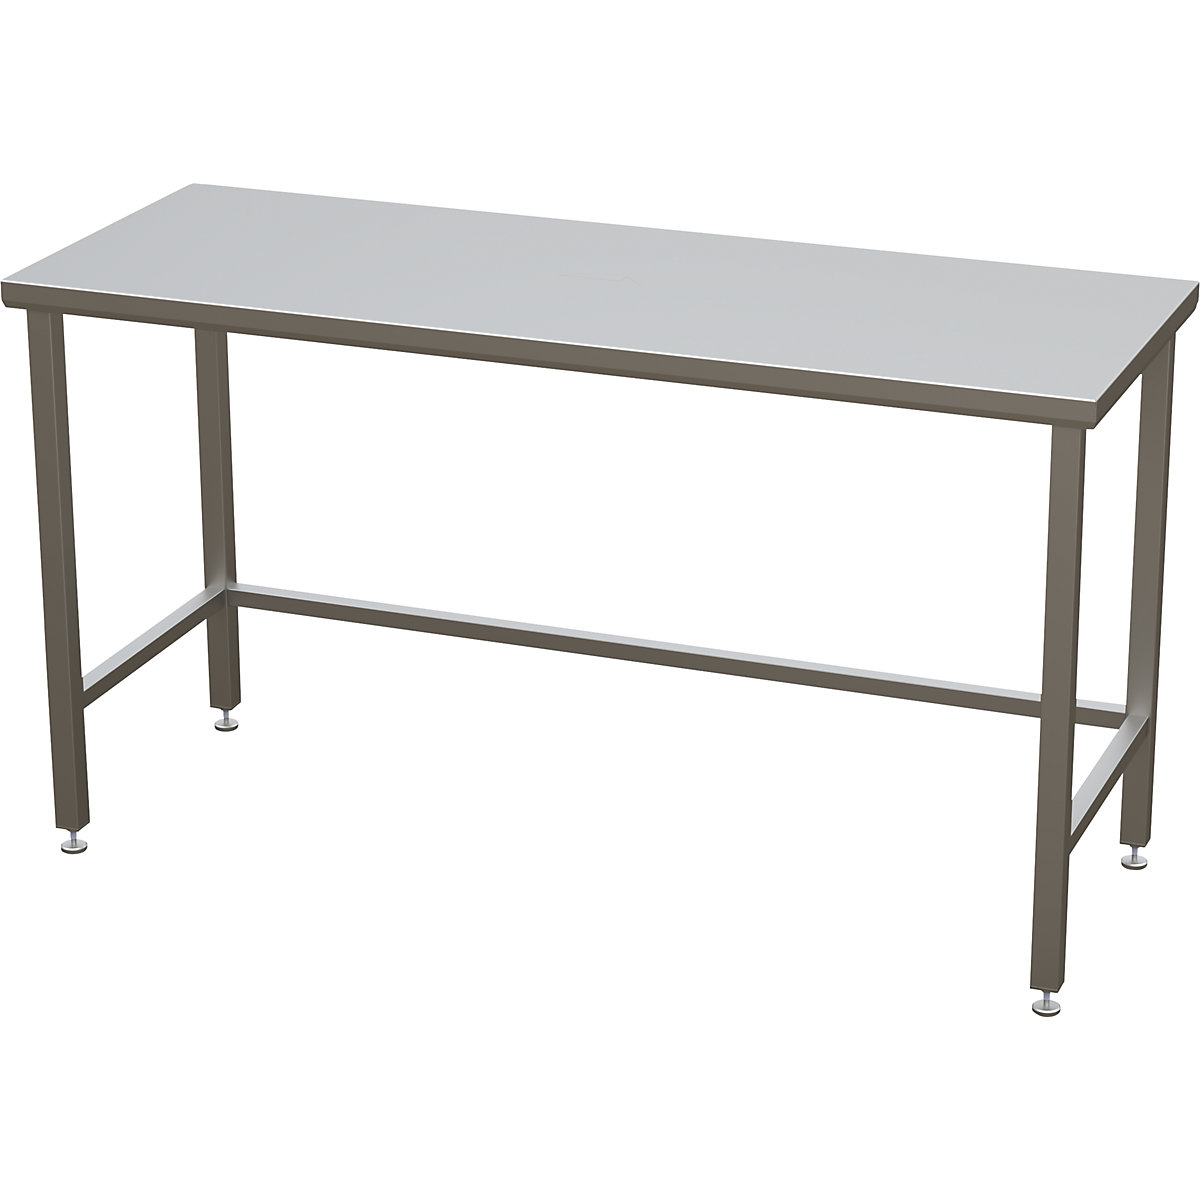 Cleanroom table with smooth worktop